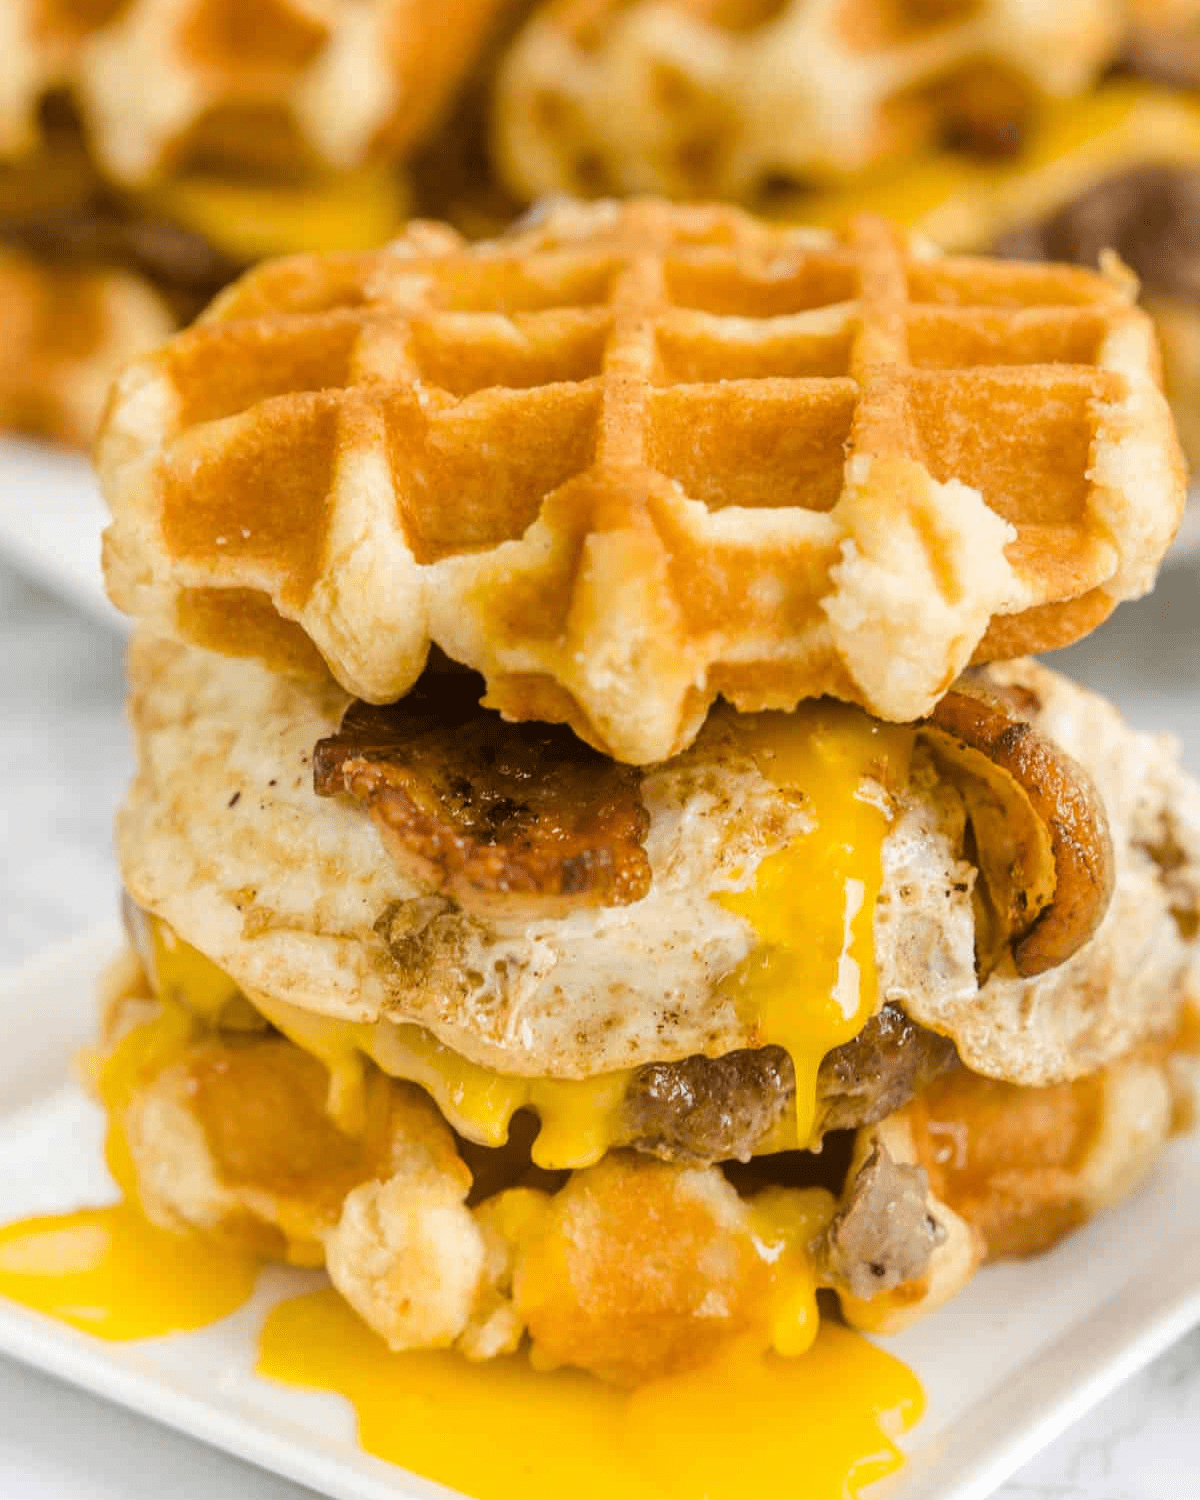 A burger served on waffles with cheese.